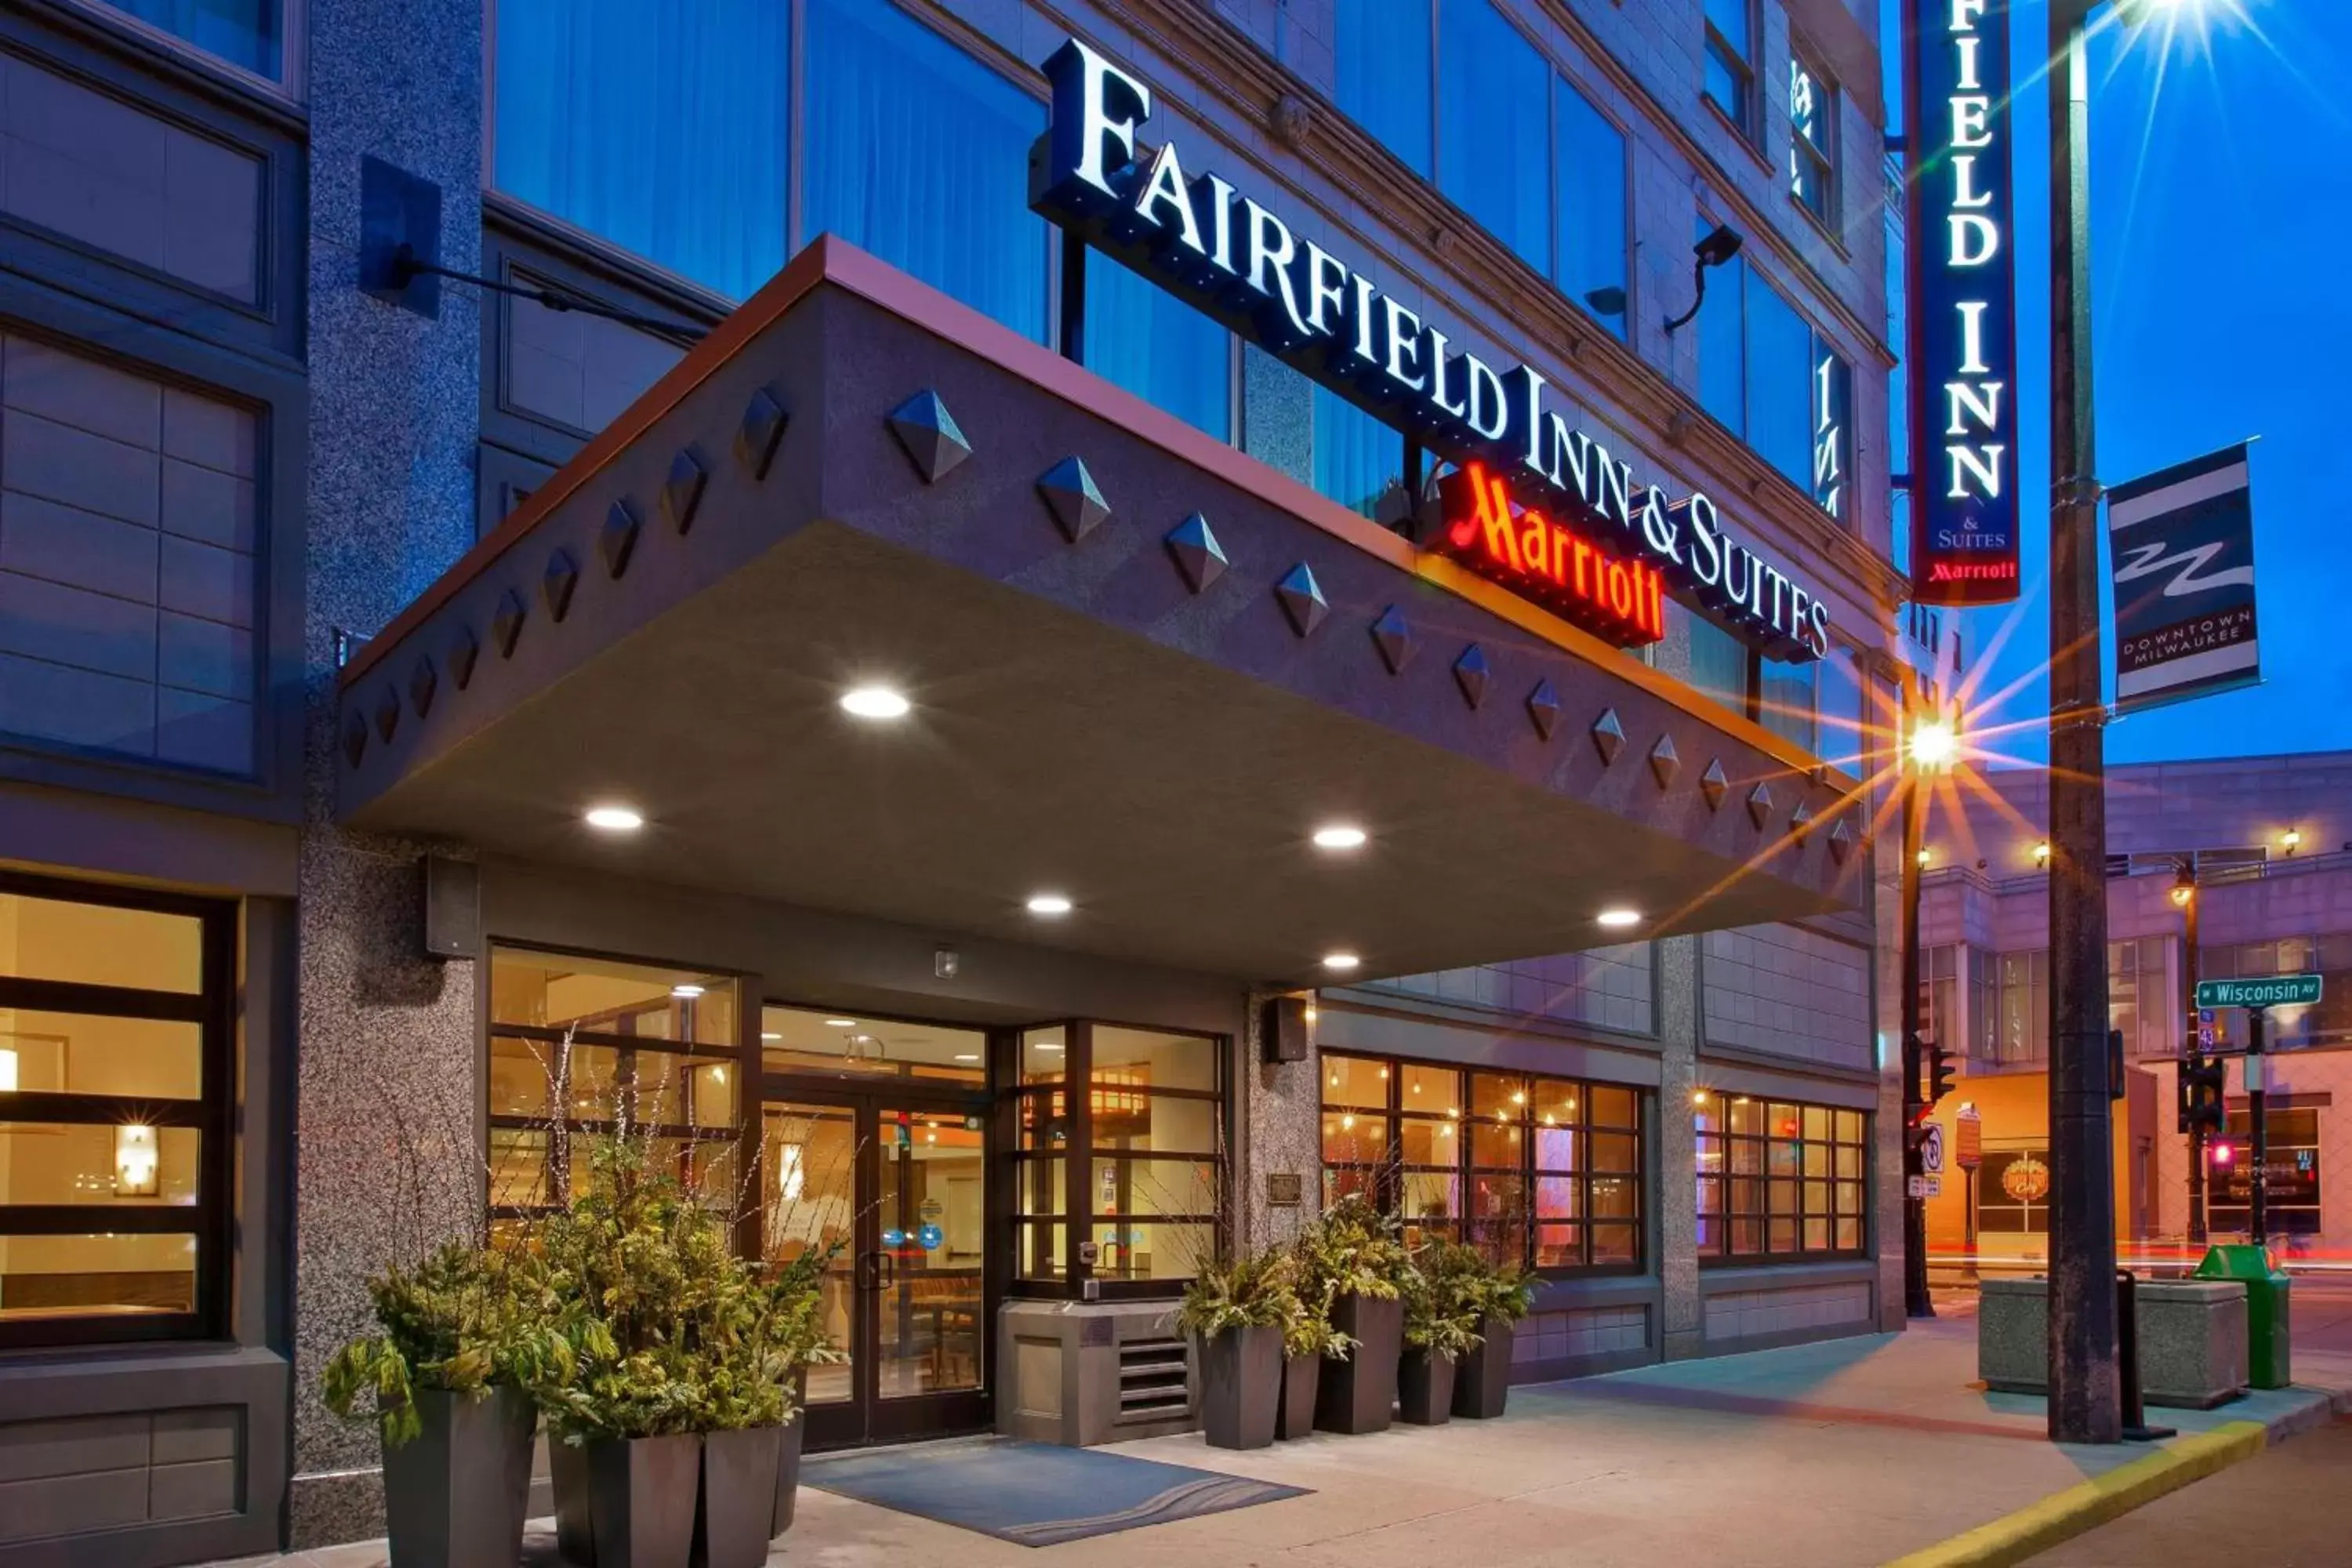 Property Building in Fairfield Inn & Suites by Marriott Milwaukee Downtown